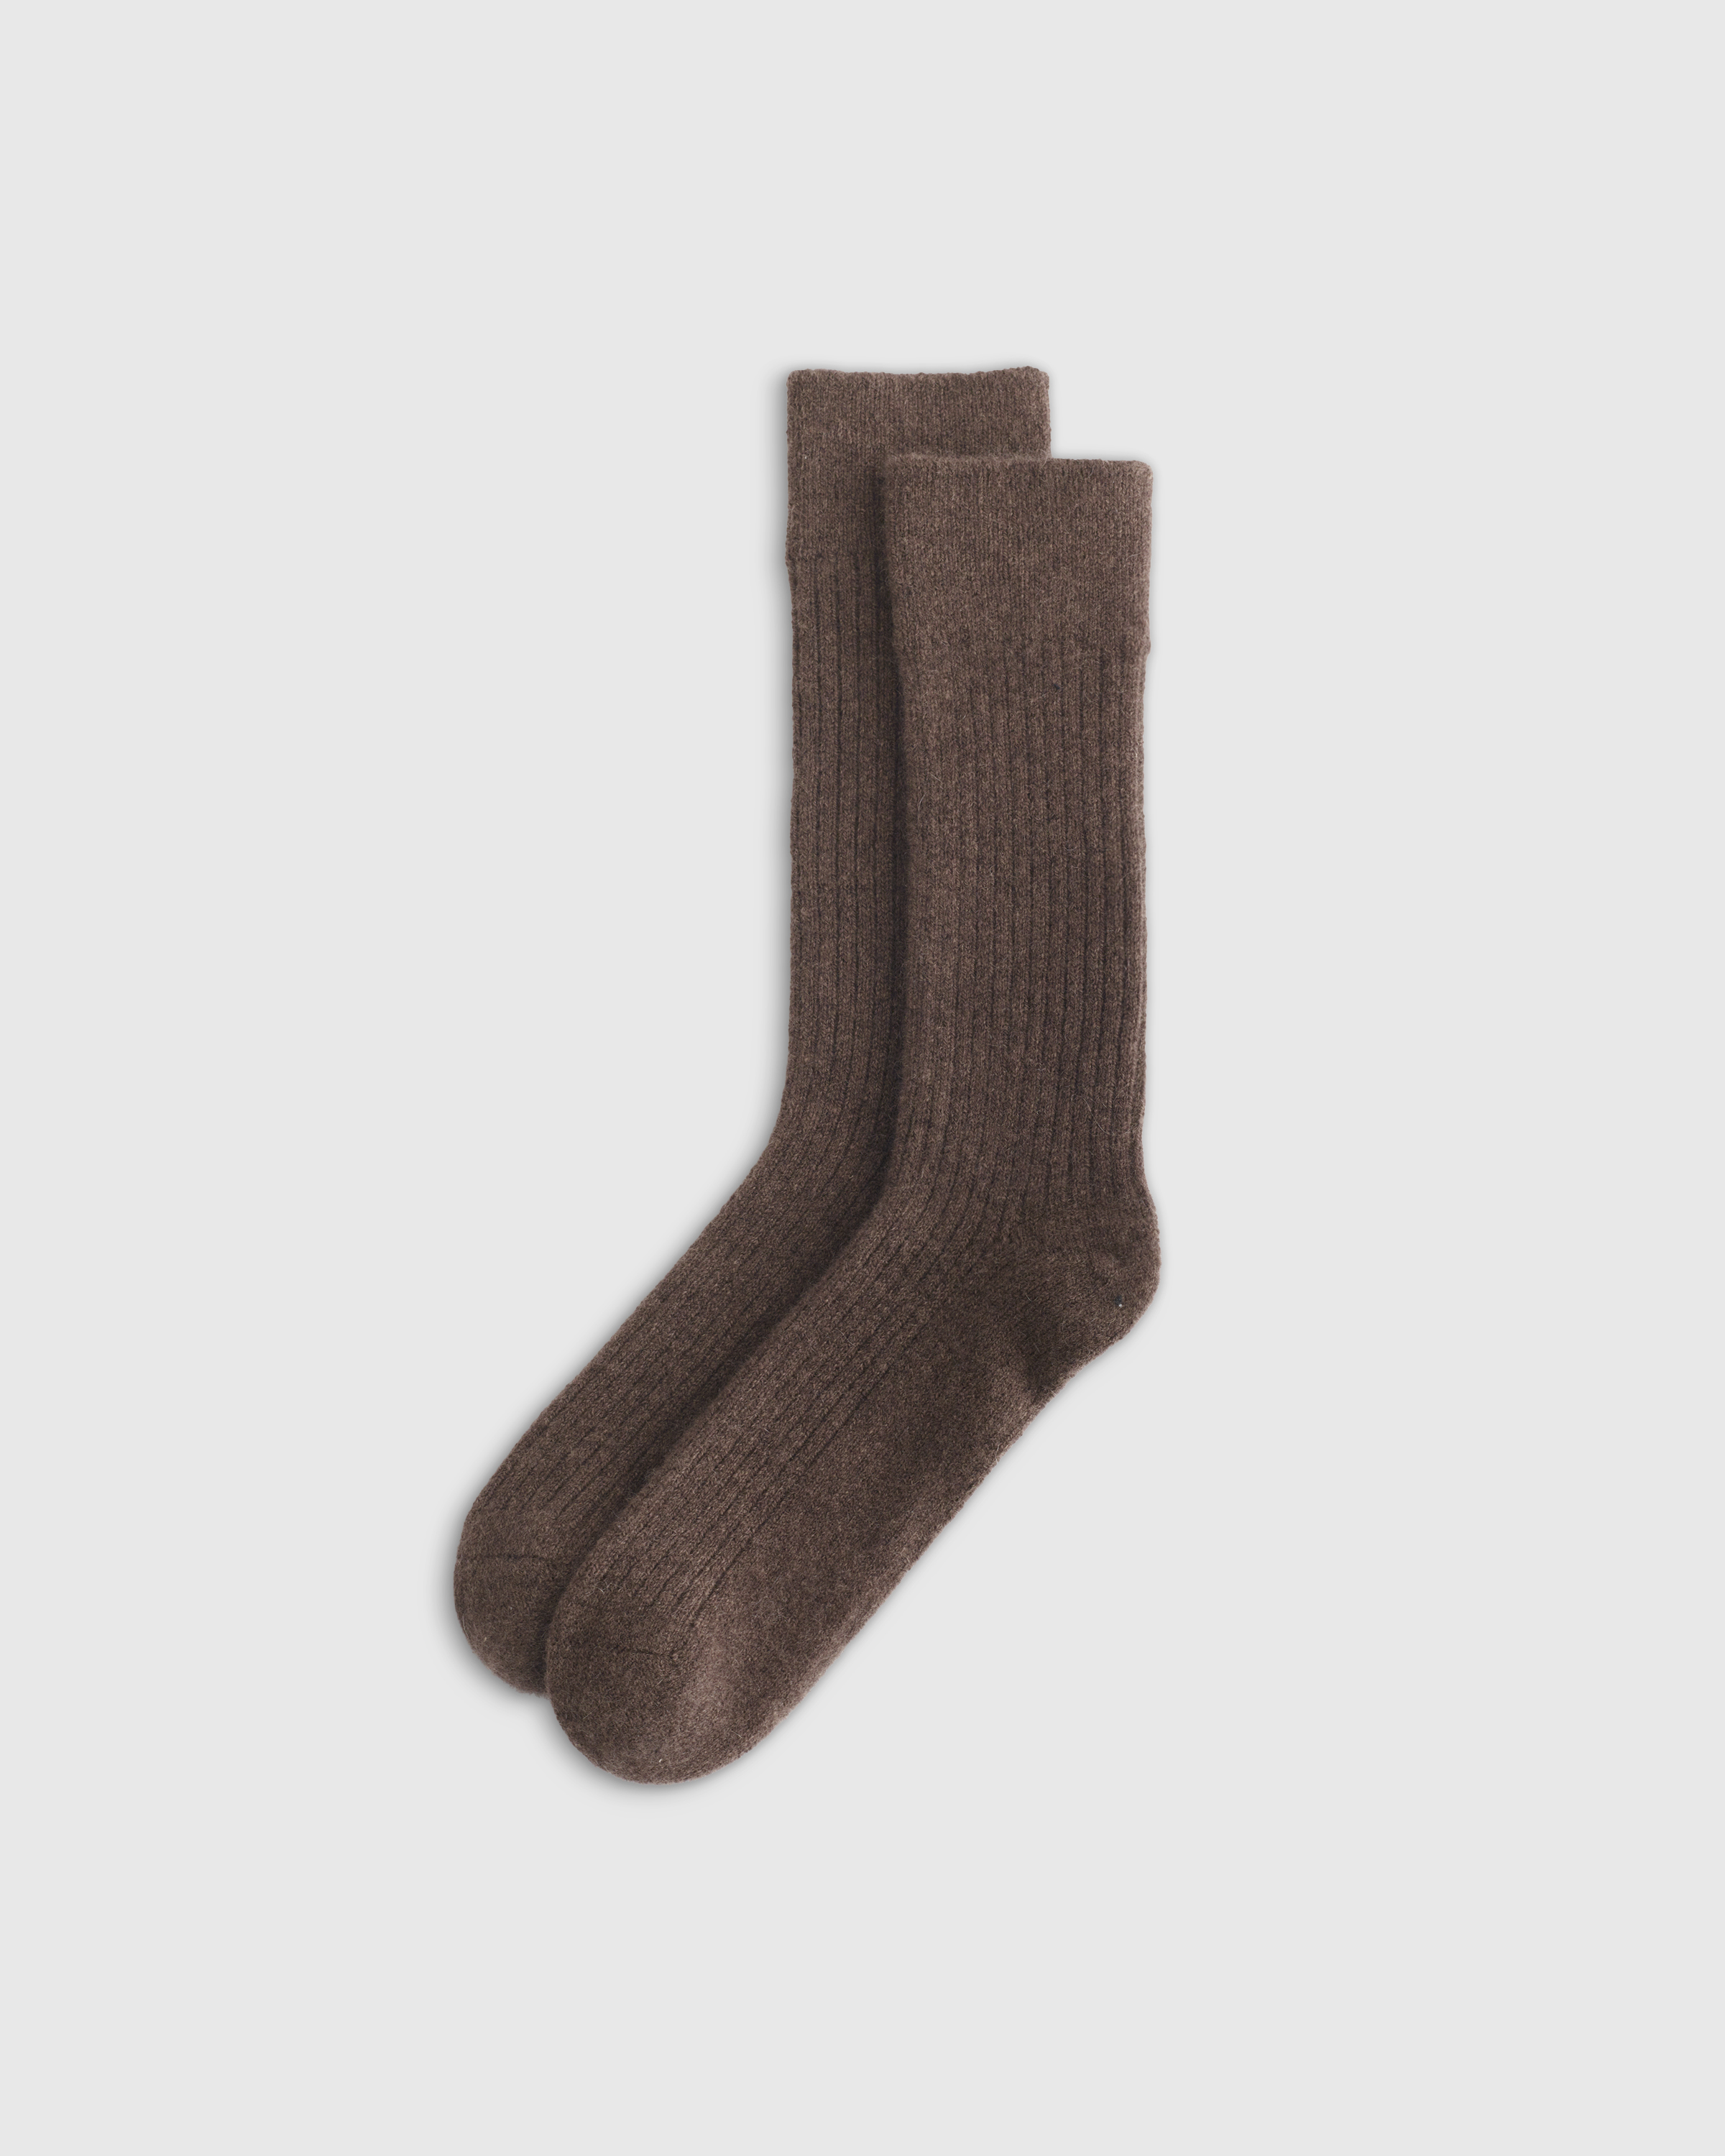 Cashmere Trouser Sock $30 
they don't shrink in the dryer, not too bulky to wear with regular shoes, insanely warm 